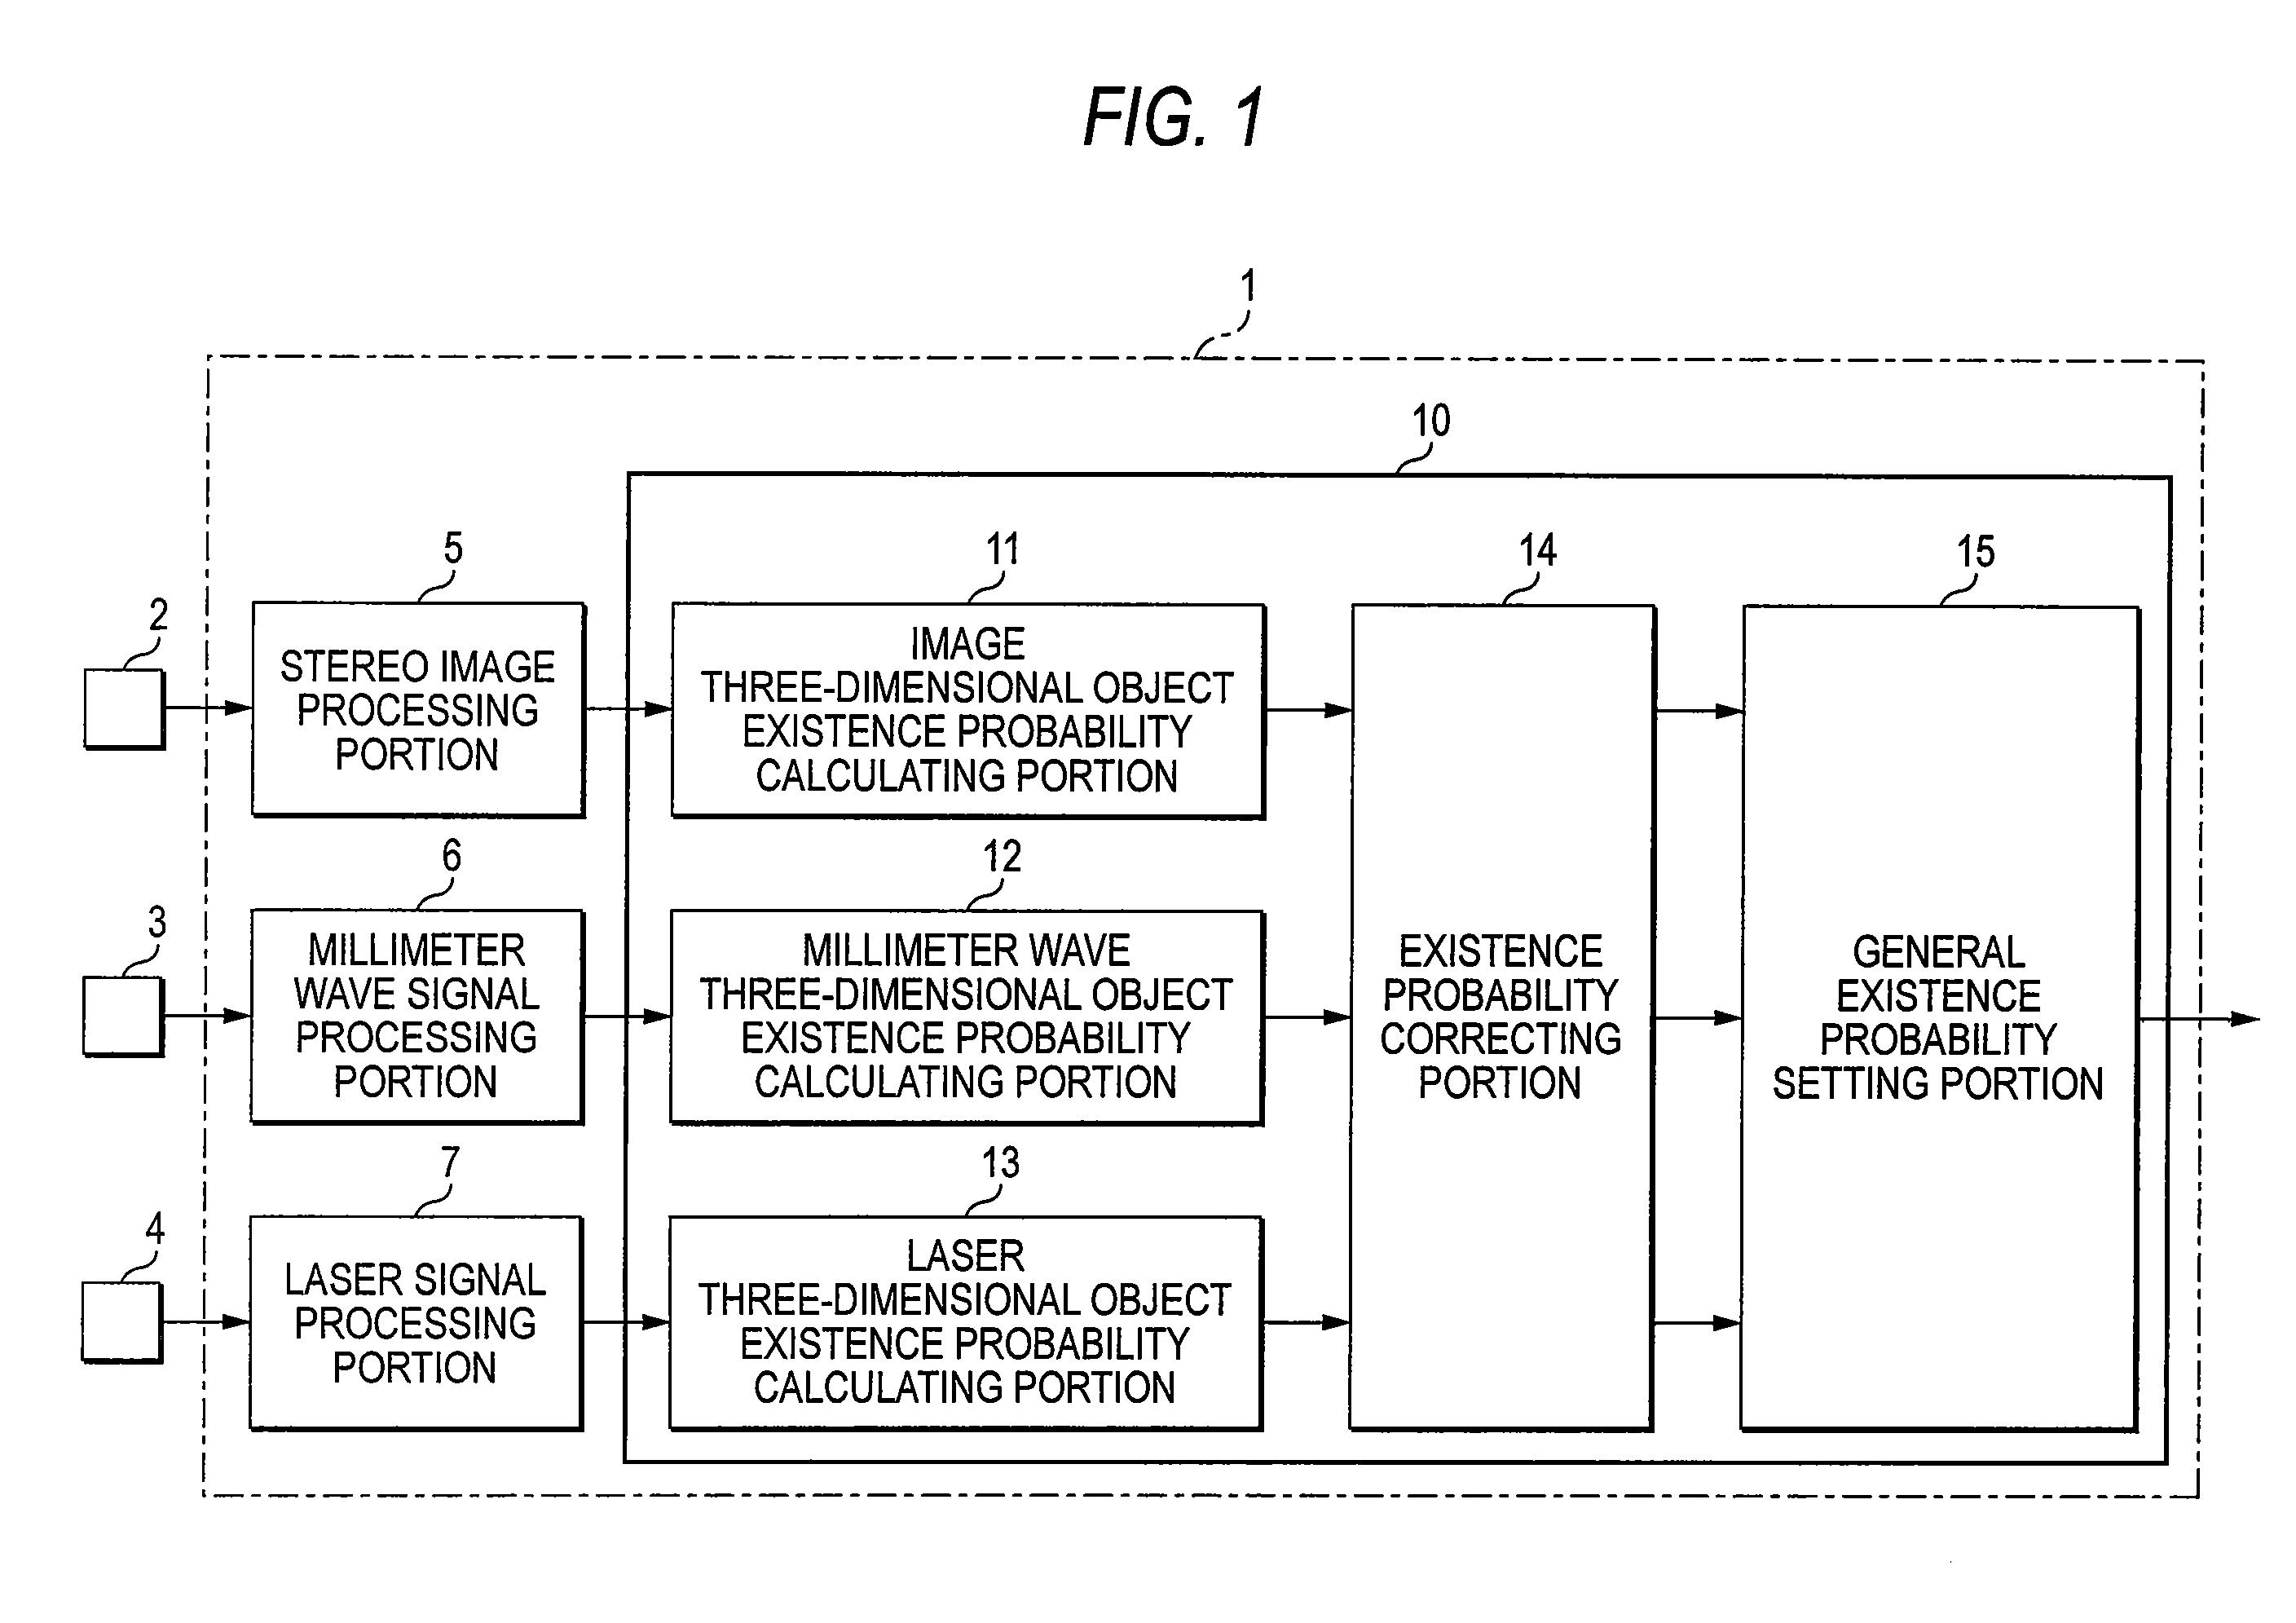 Object recognizing apparatus